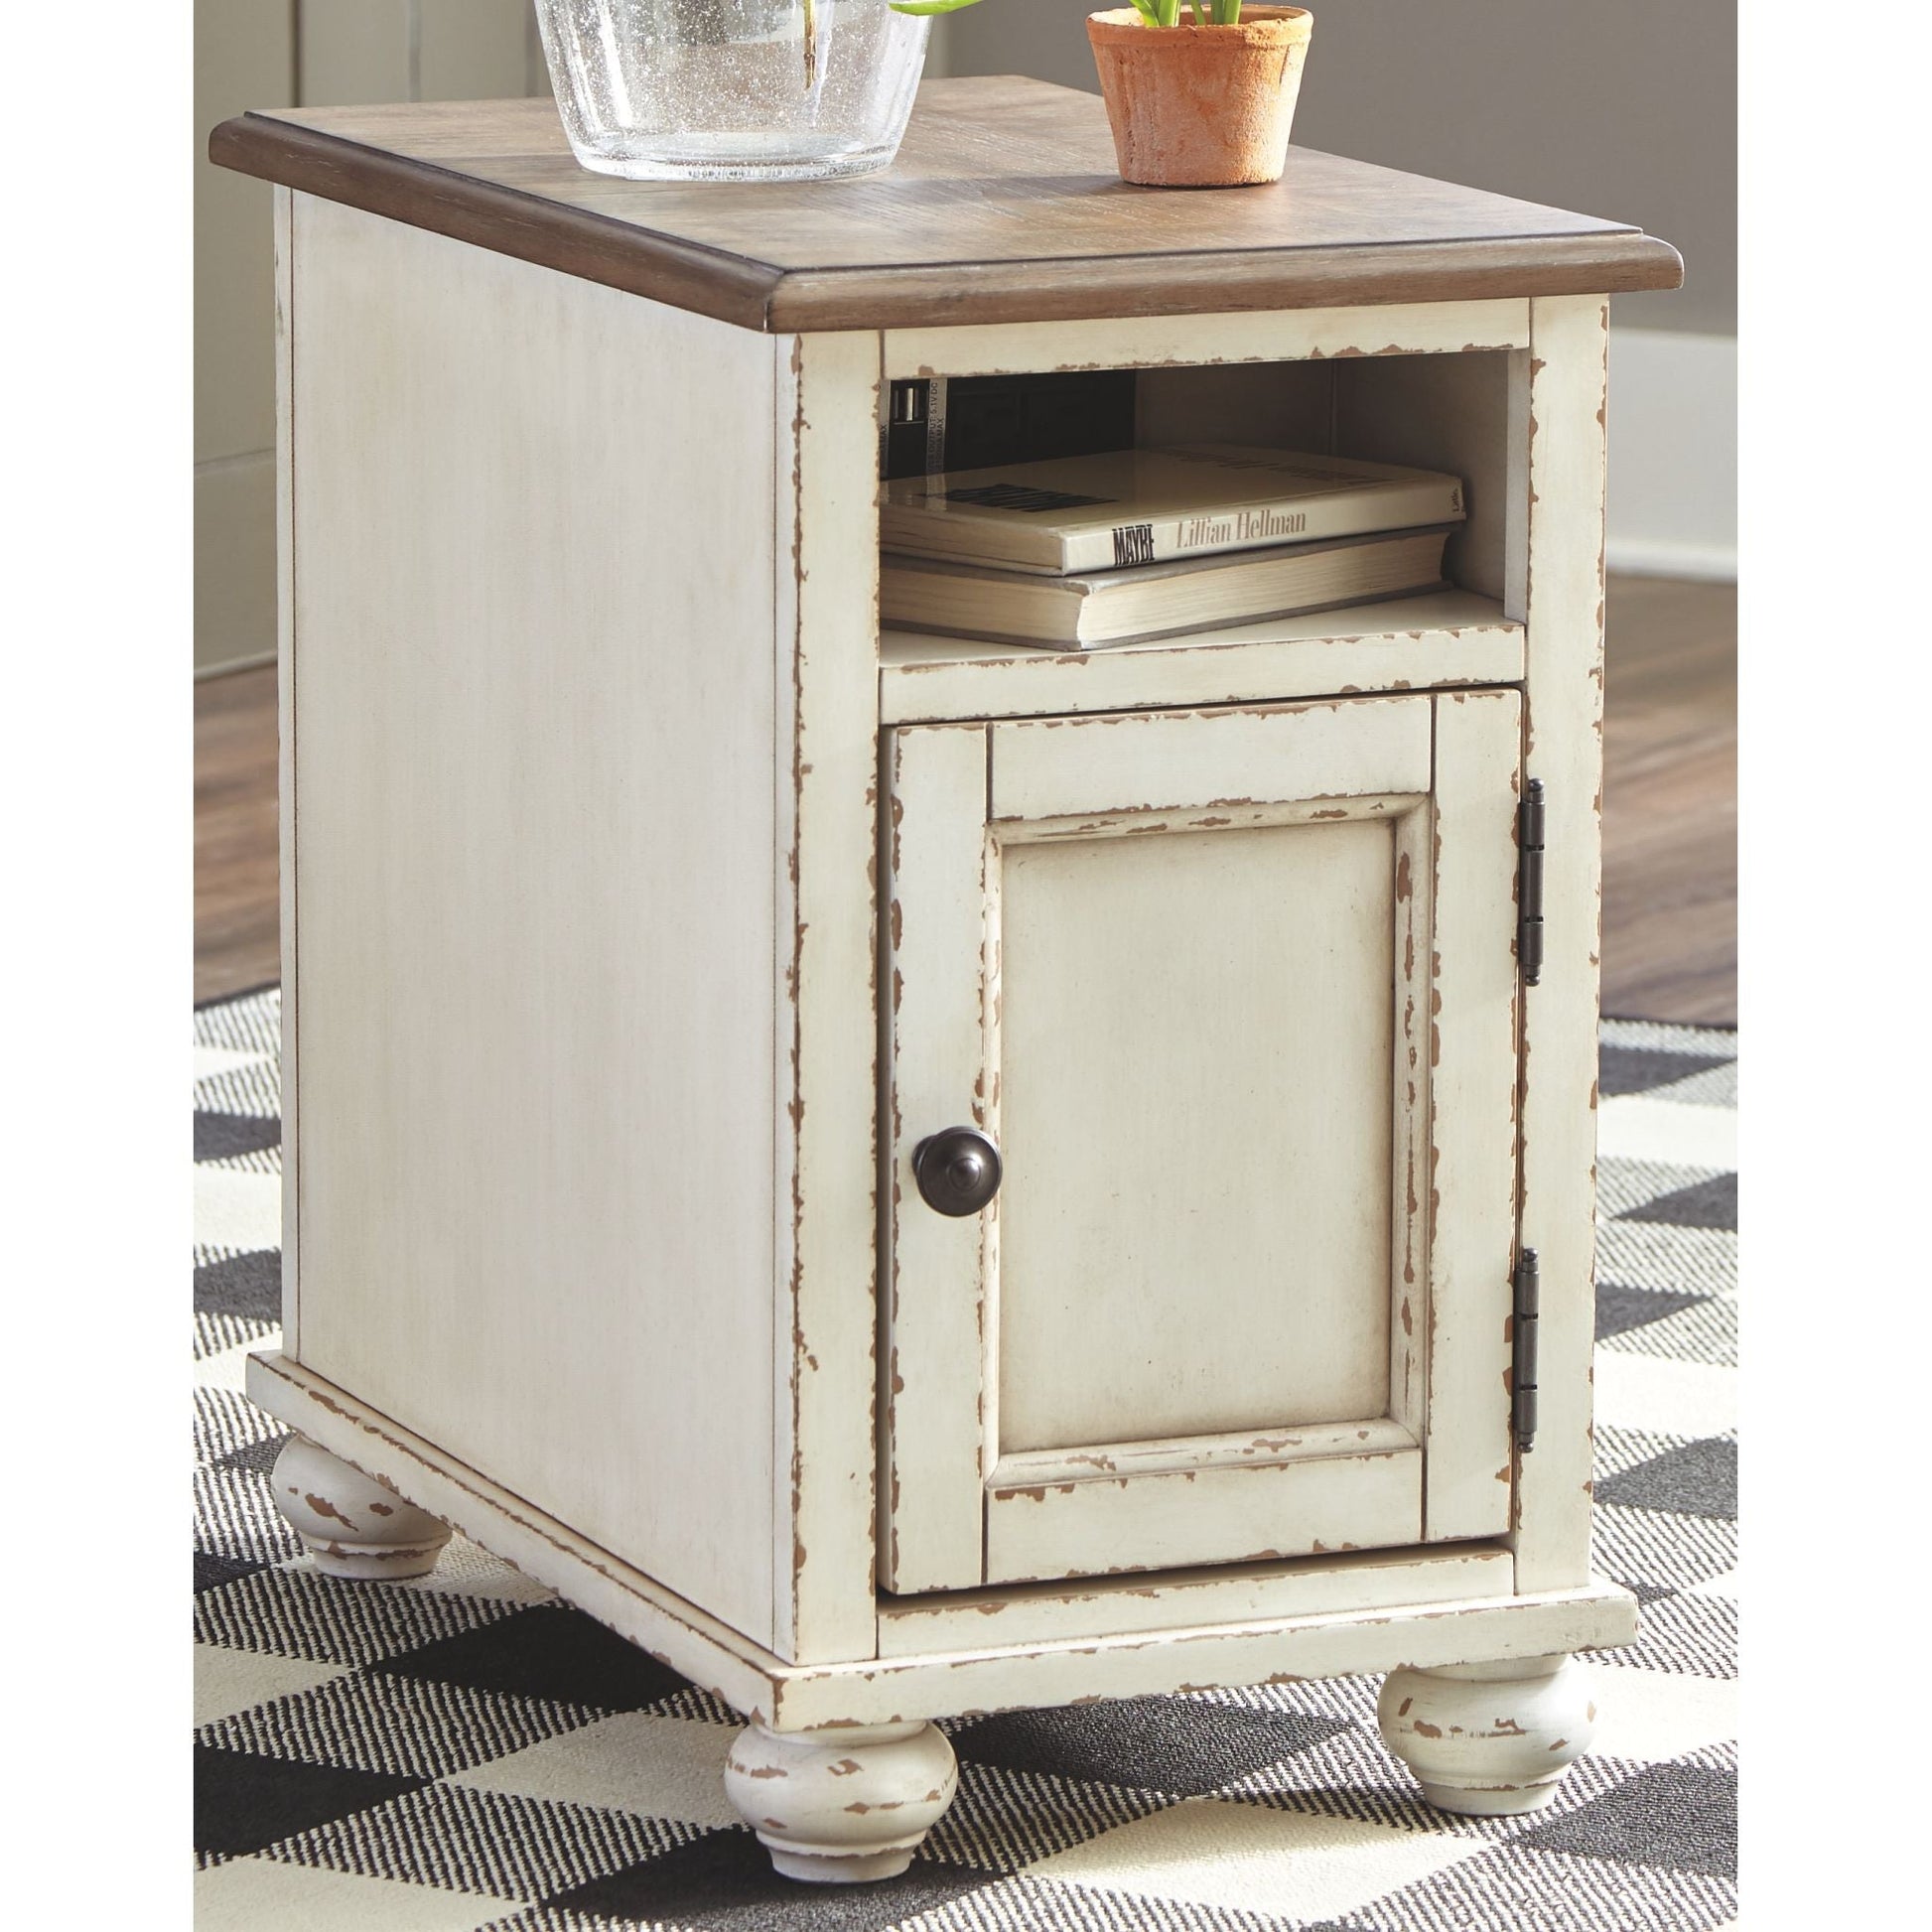 Allison Chair Side End Table - White/Brown